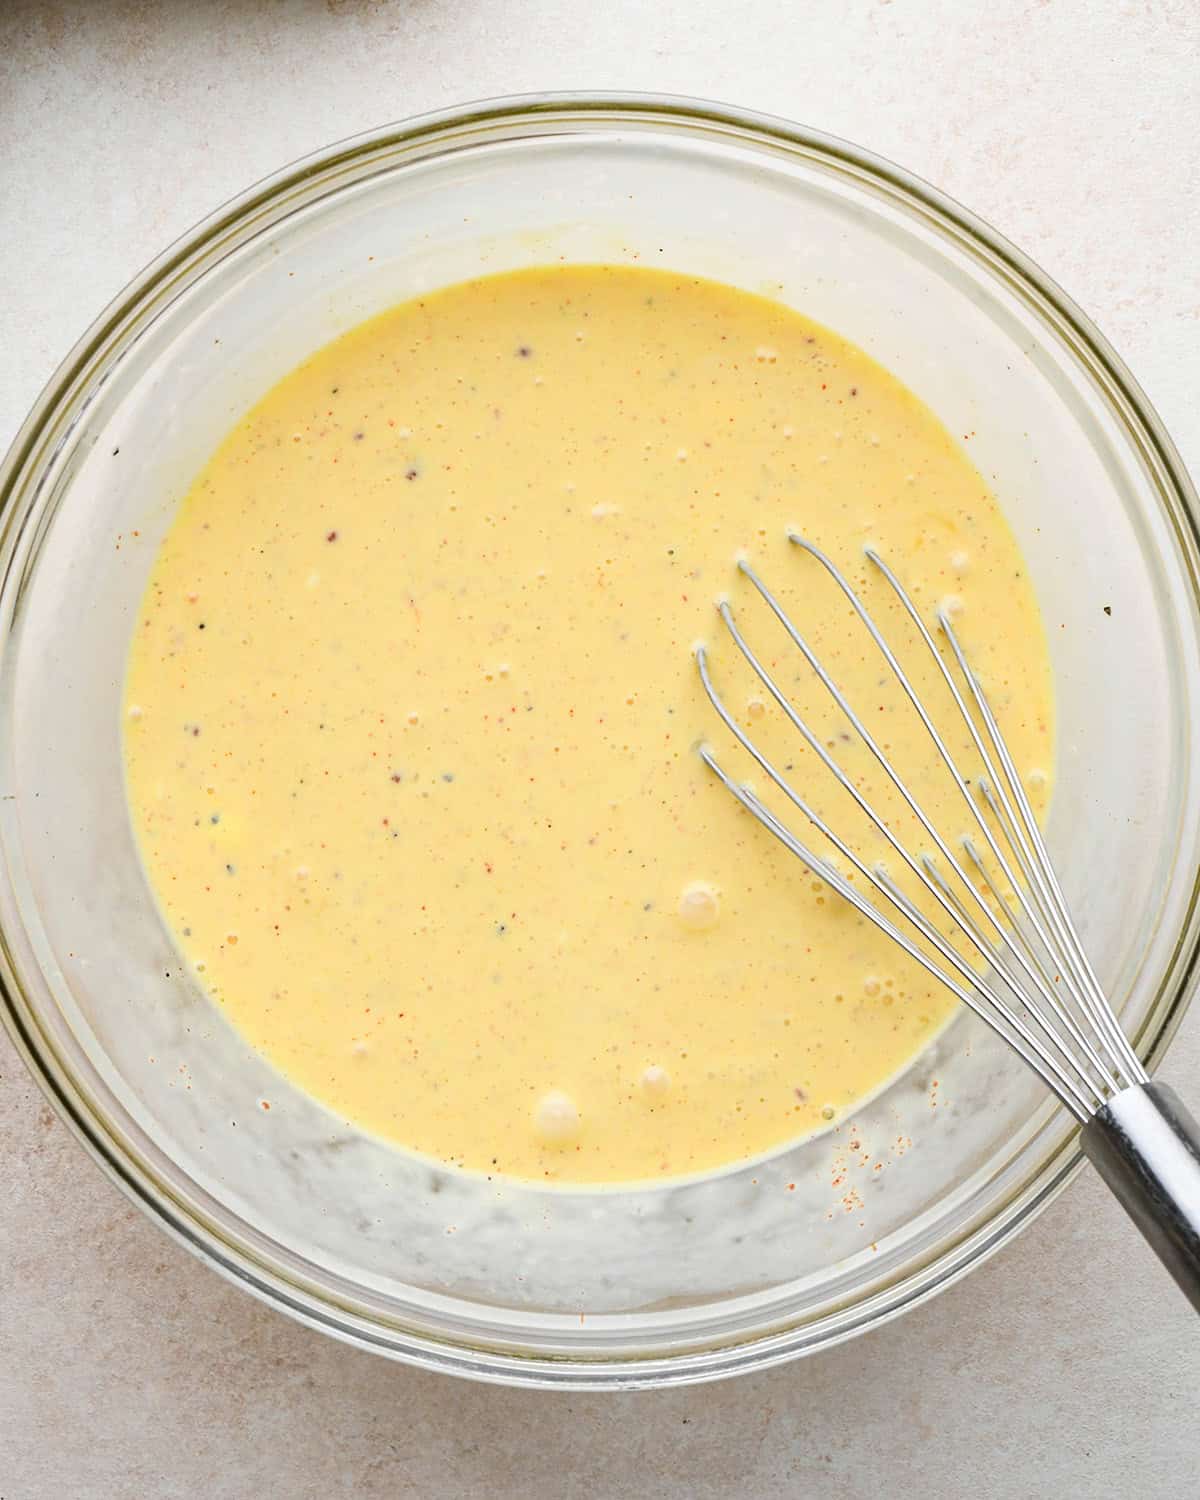 how to make quiche - filling ingredients in a bowl after whisking